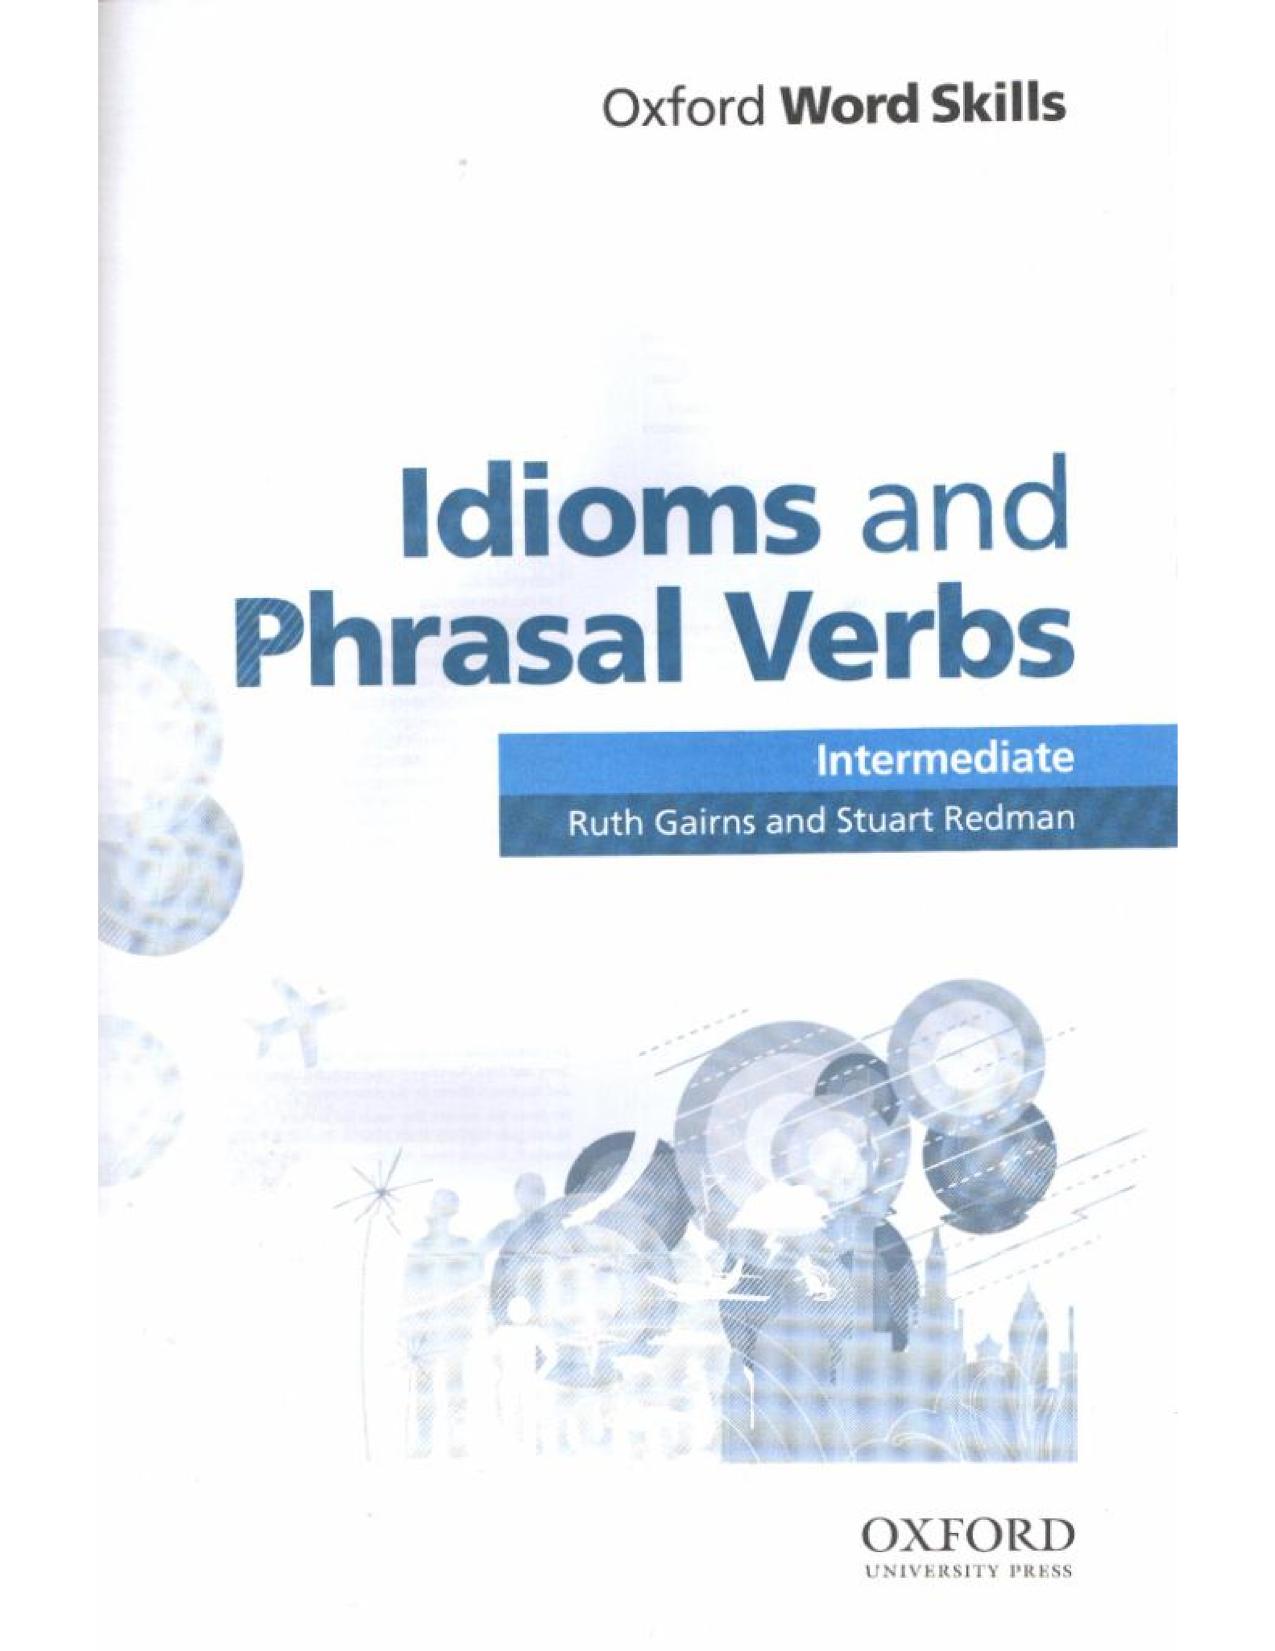 Idioms and phrasal verbs advanced pdf free download download zoom for pc windows 10